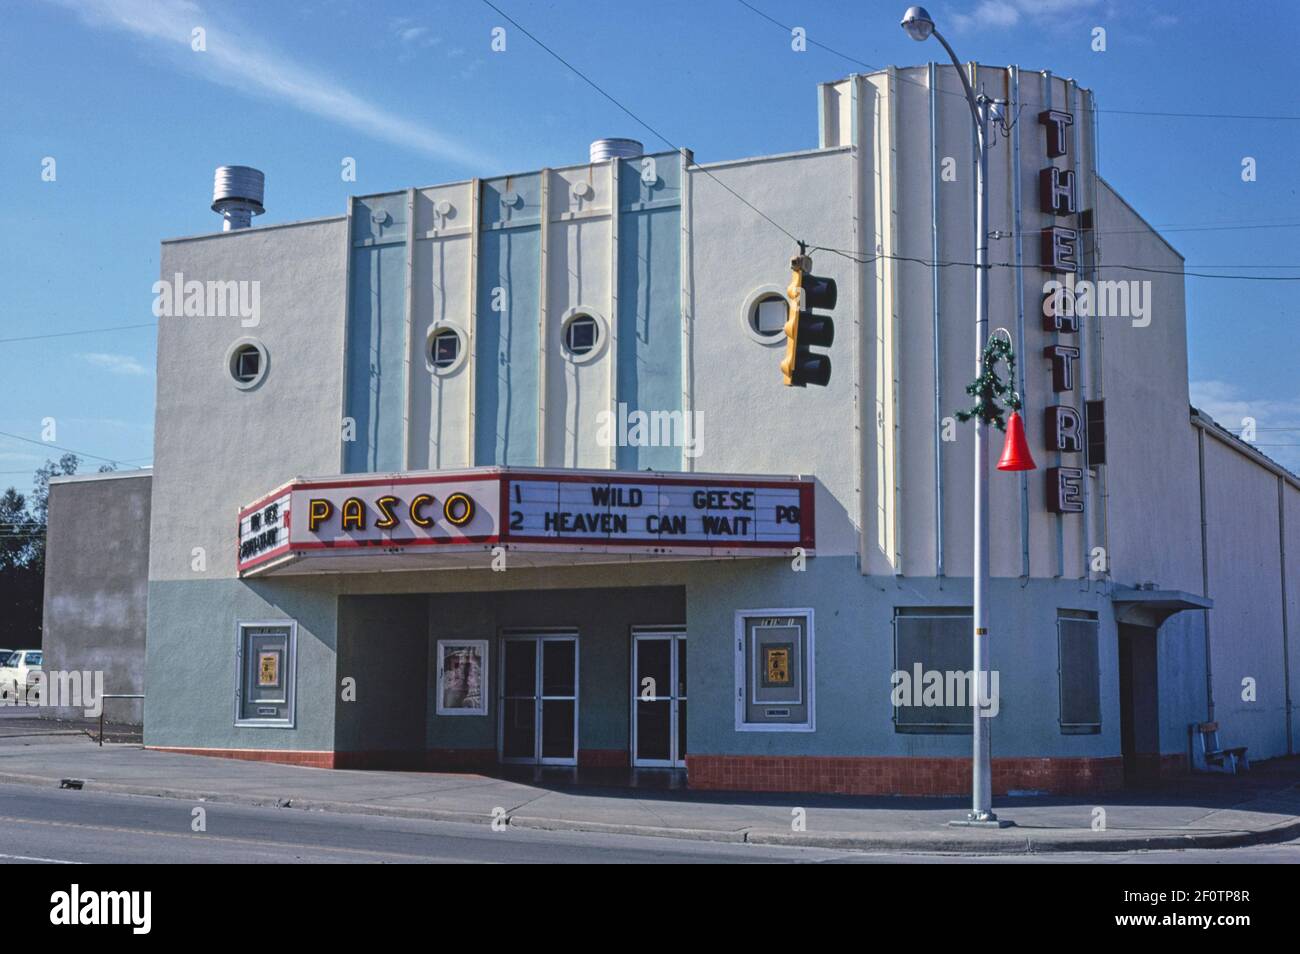 Page 4 - Archival Movie Theater High Resolution Stock Photography And Images - Alamy